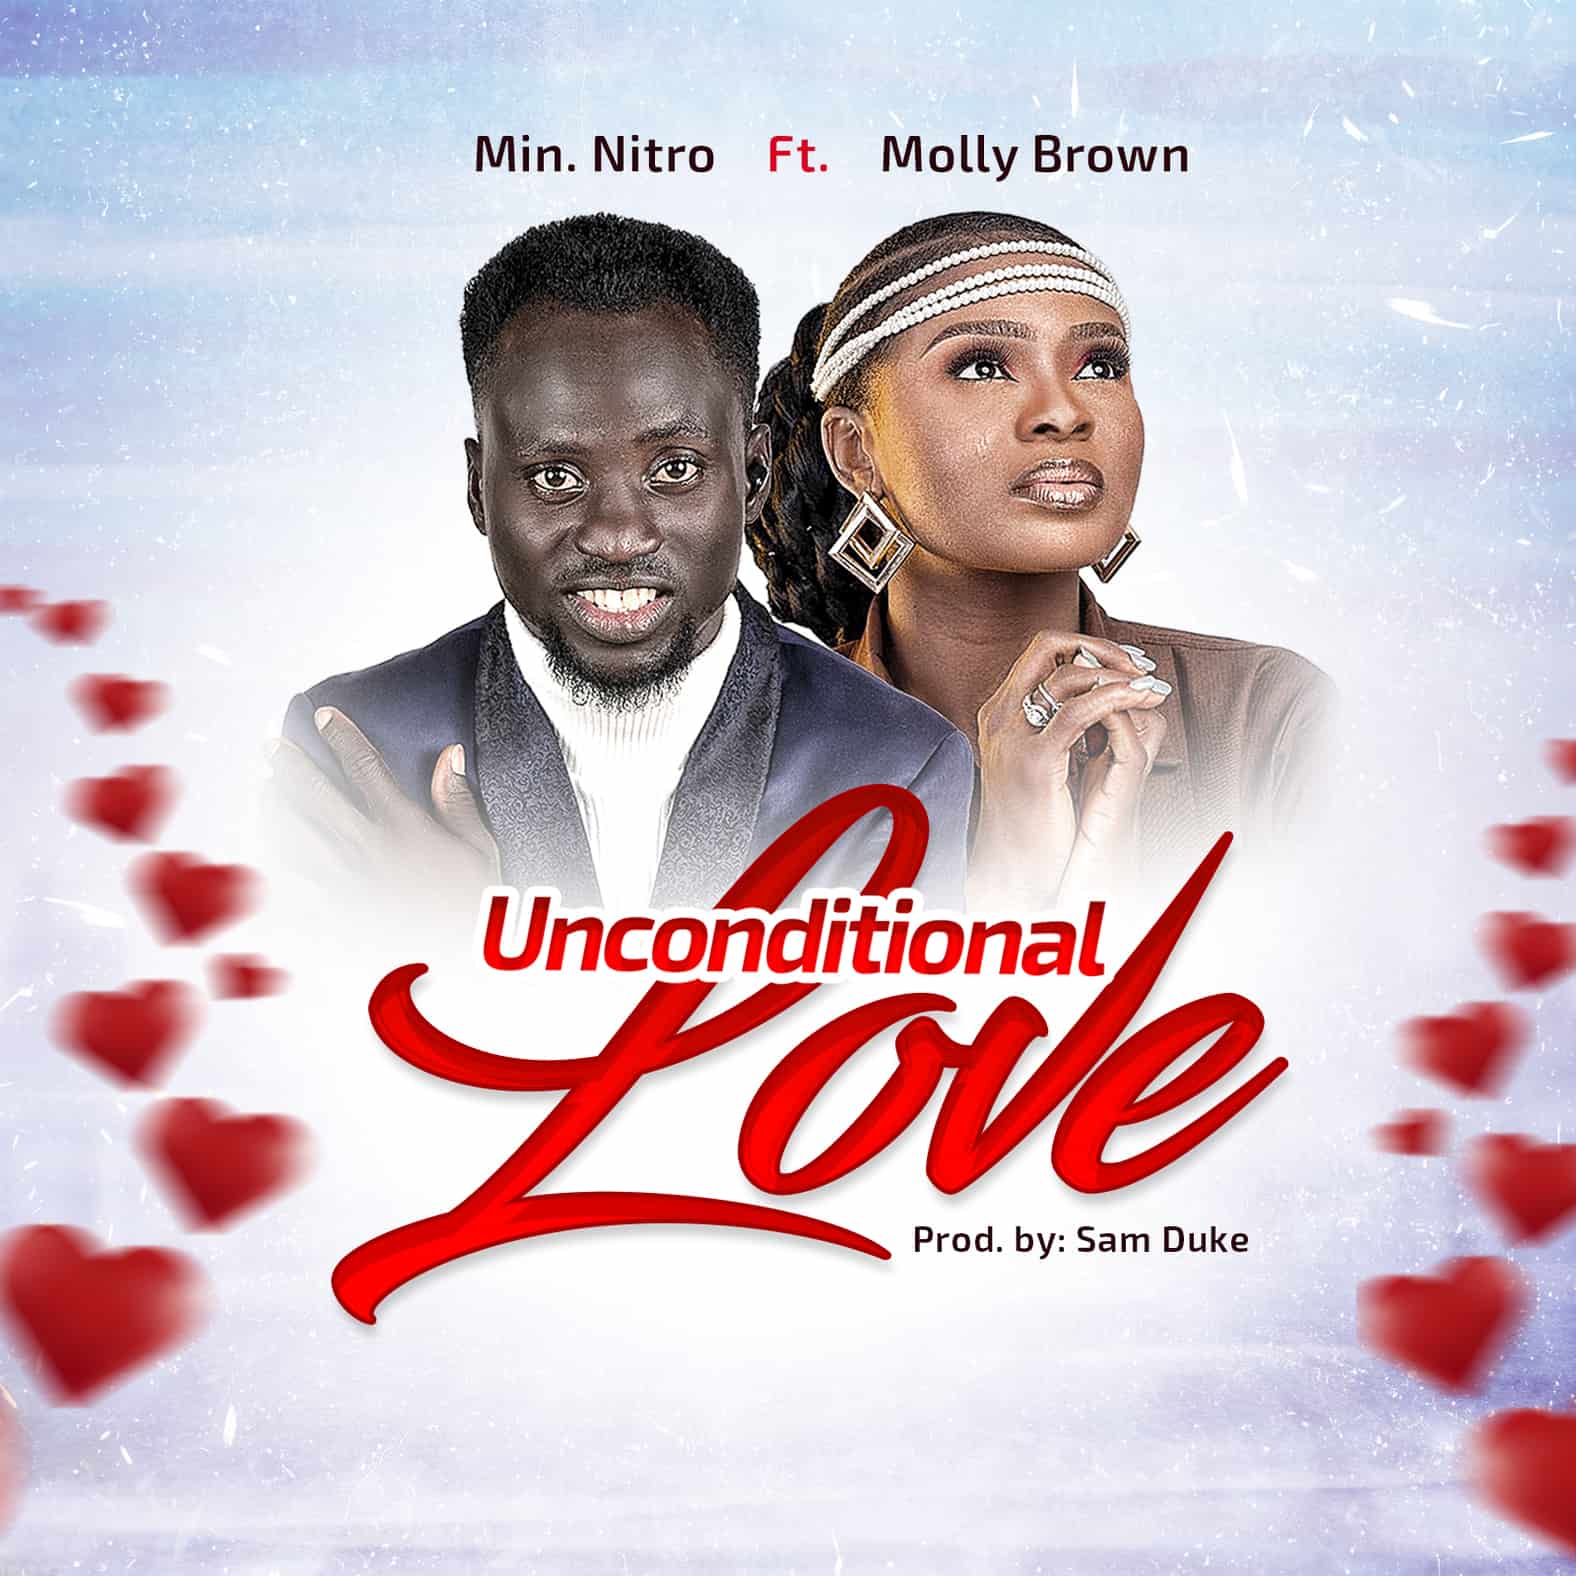 Download Mp3: Min. Nitro - Unconditional Love ft Molly Brown